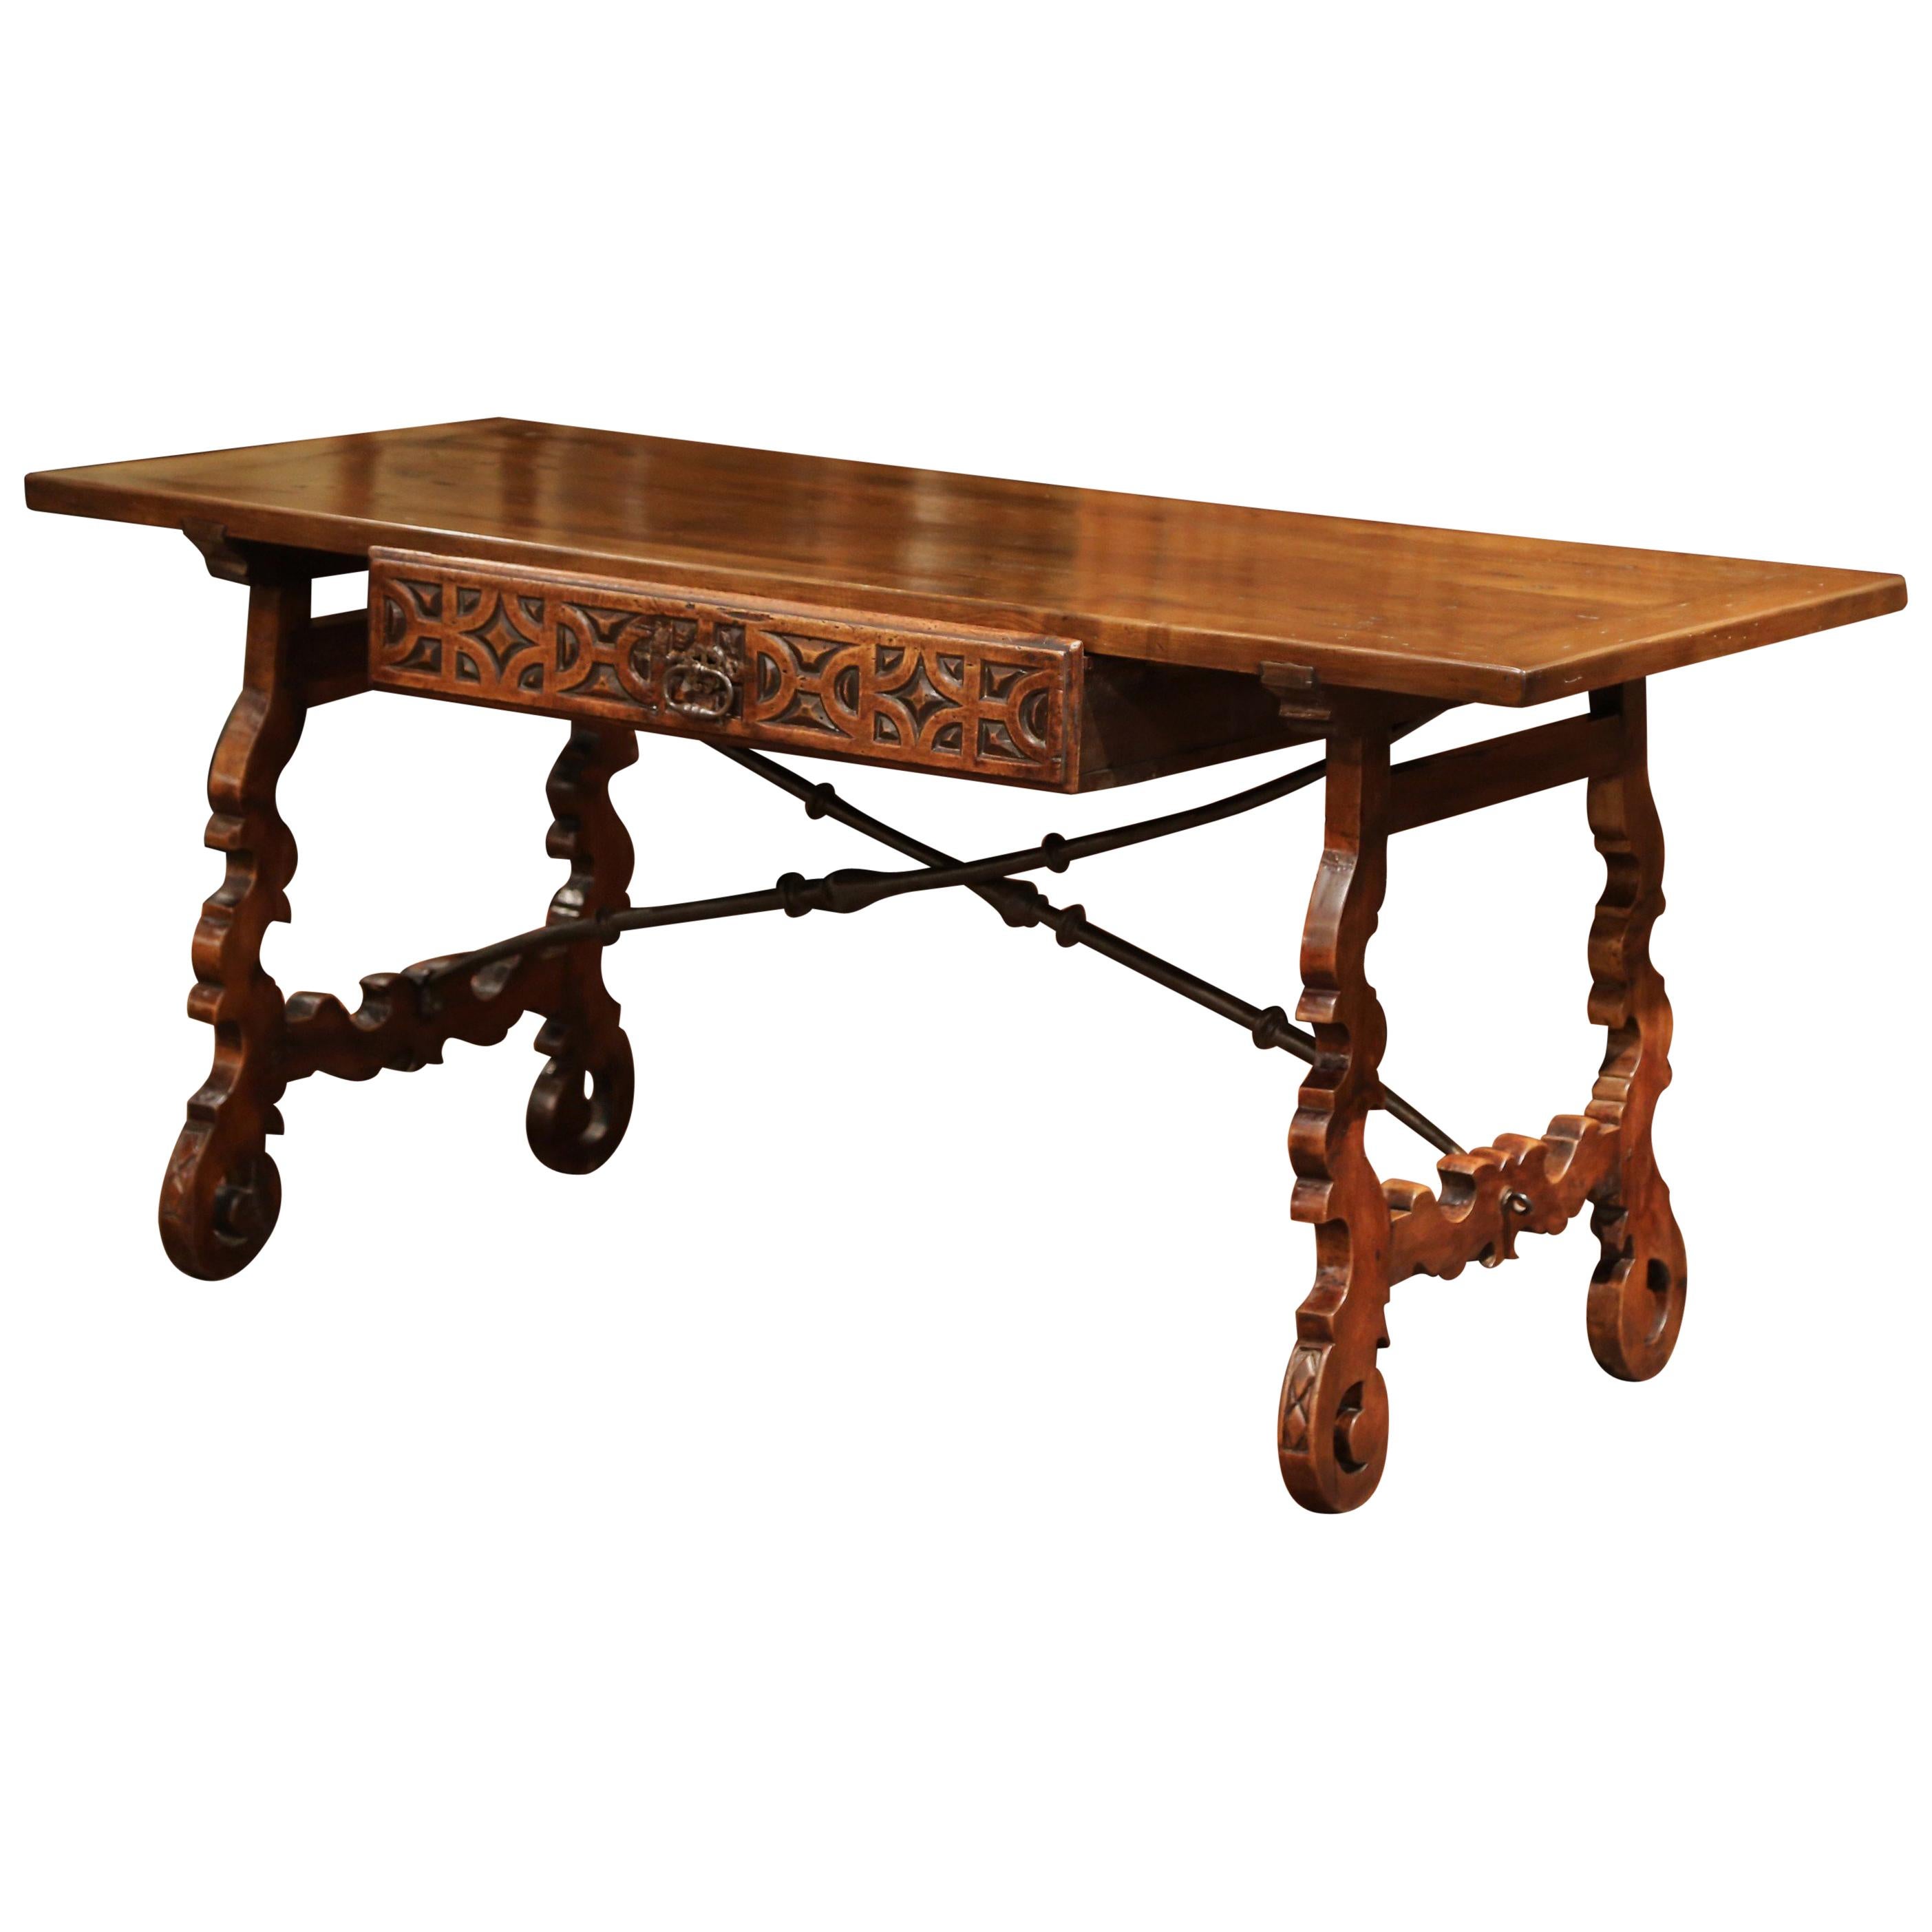 Mid-19th Century Spanish Carved Walnut Writing Table Desk with Centre Drawer